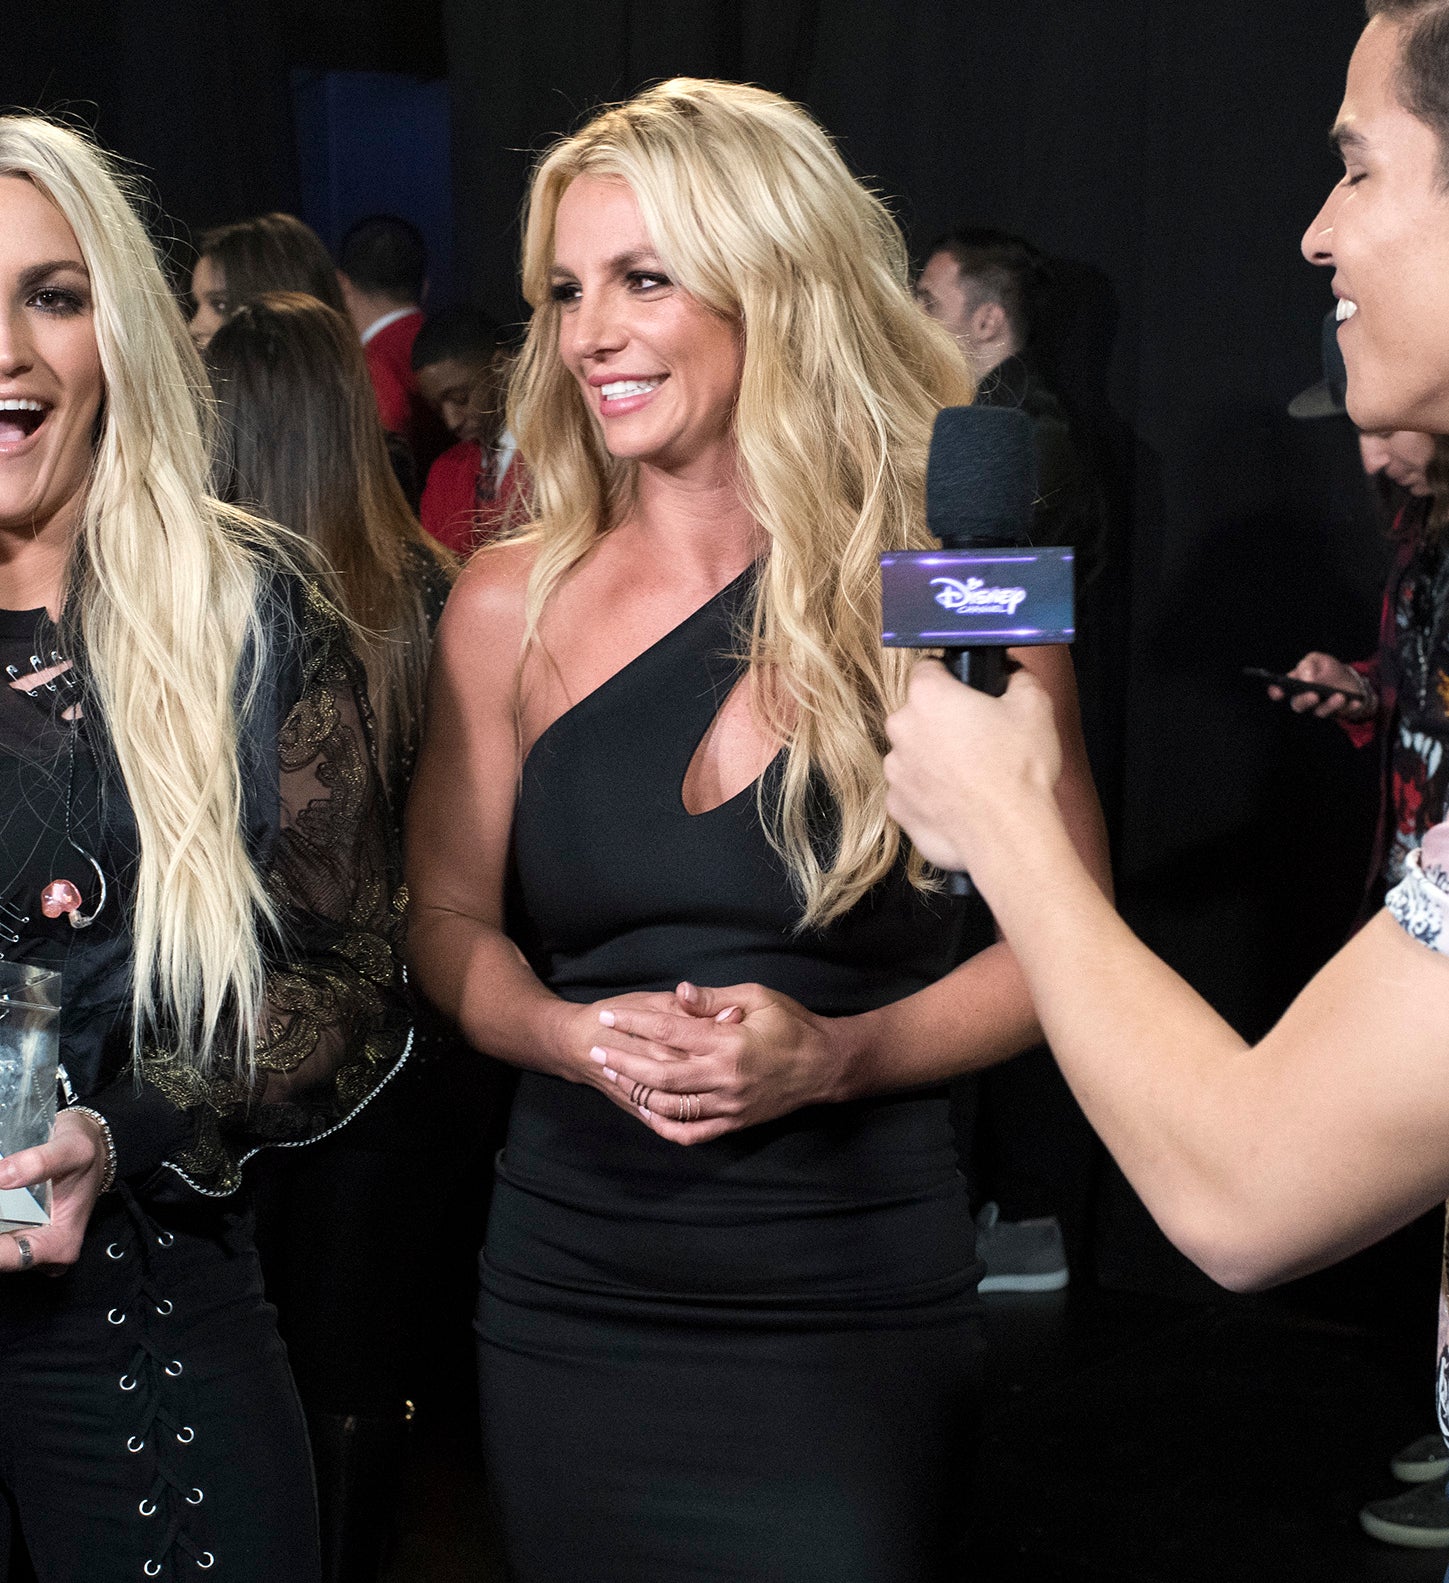 britney looking proudly at her sister as jamie lynn holds an award